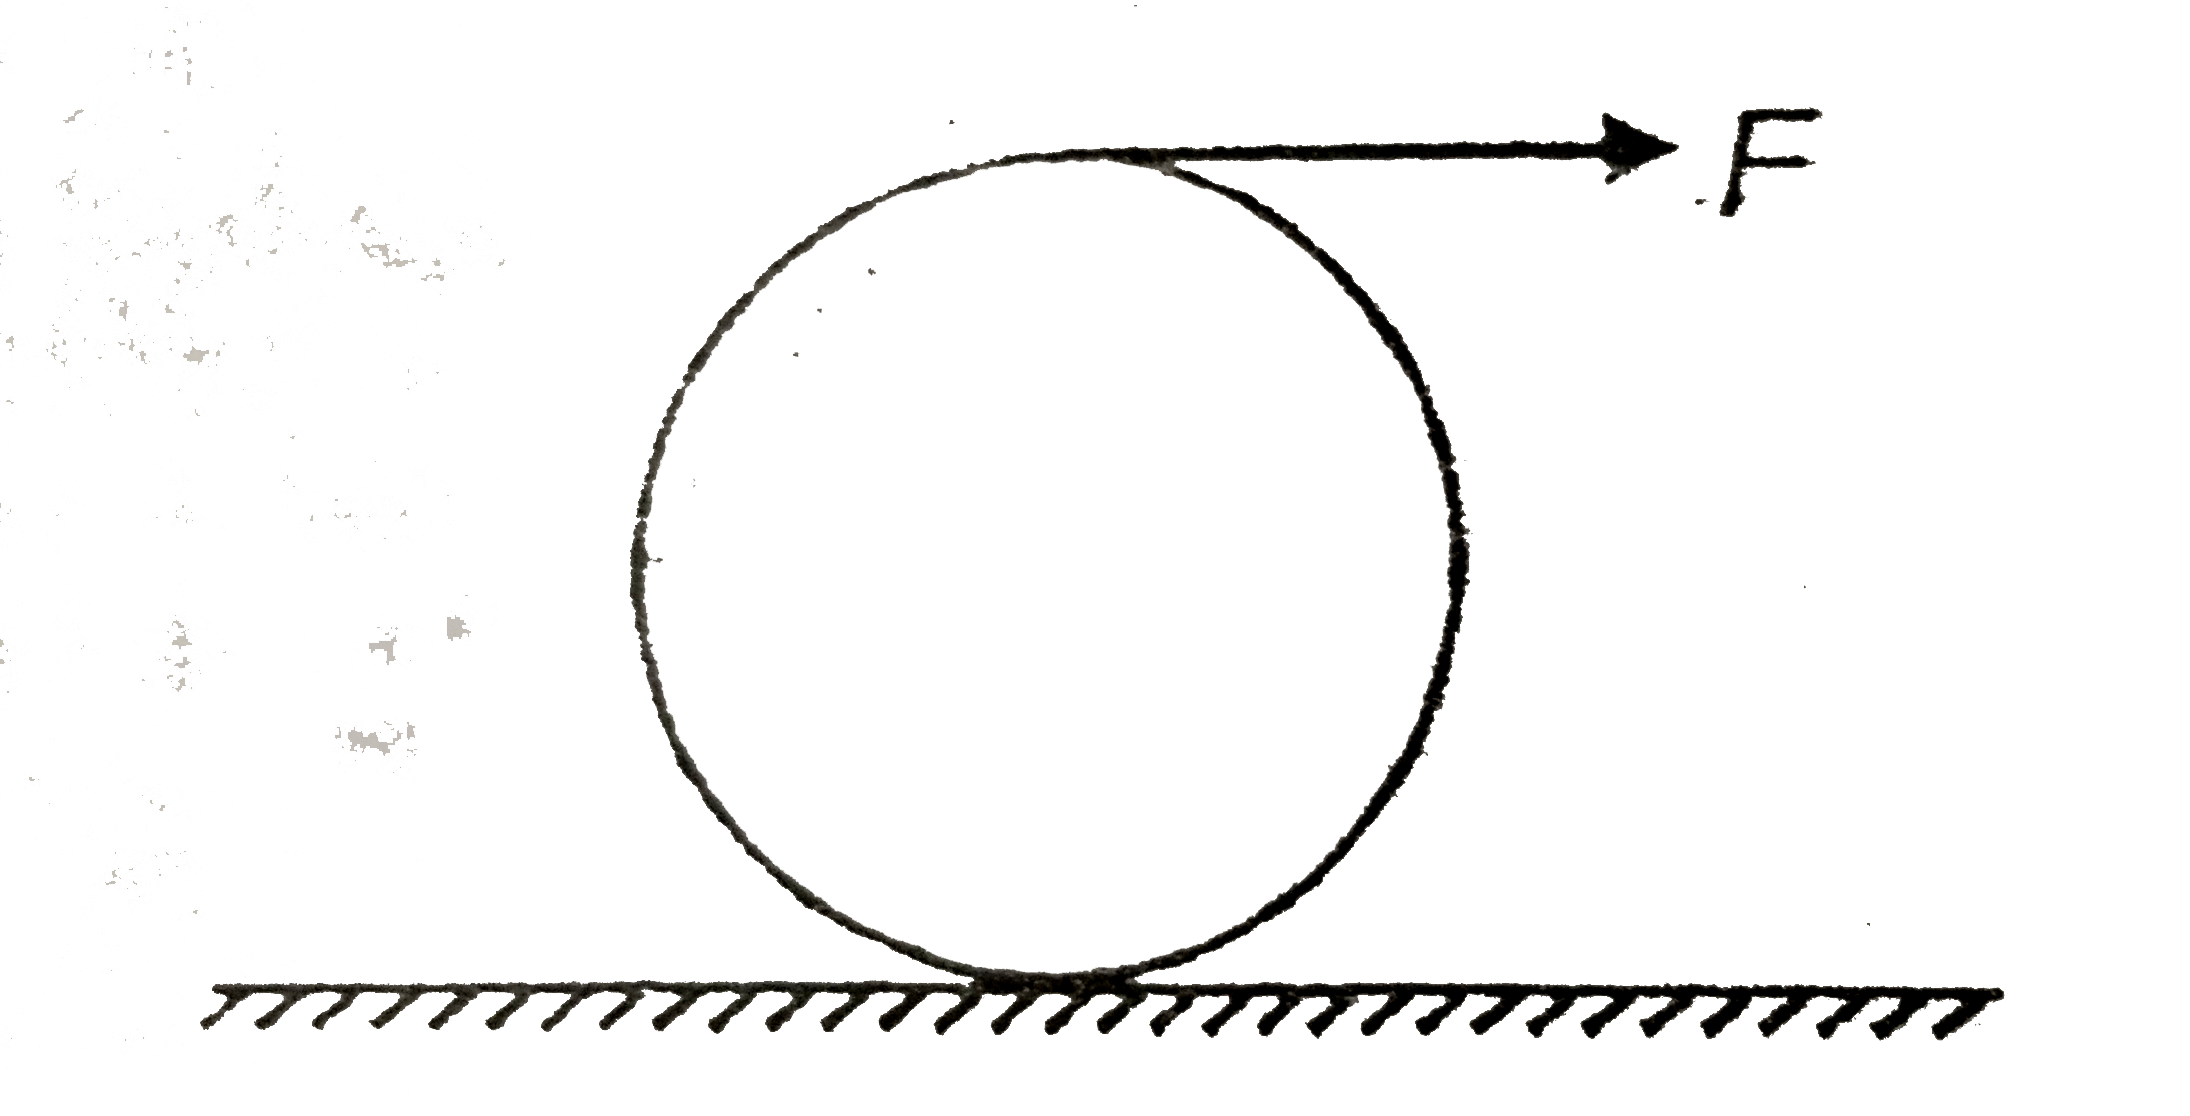 A disc of radius R and mass M is under pure rolling under the action of a force F applied at the topmost point as shown in figure. There is sufficient friciton between the disc and the horizontal surface. The acceleration is given as